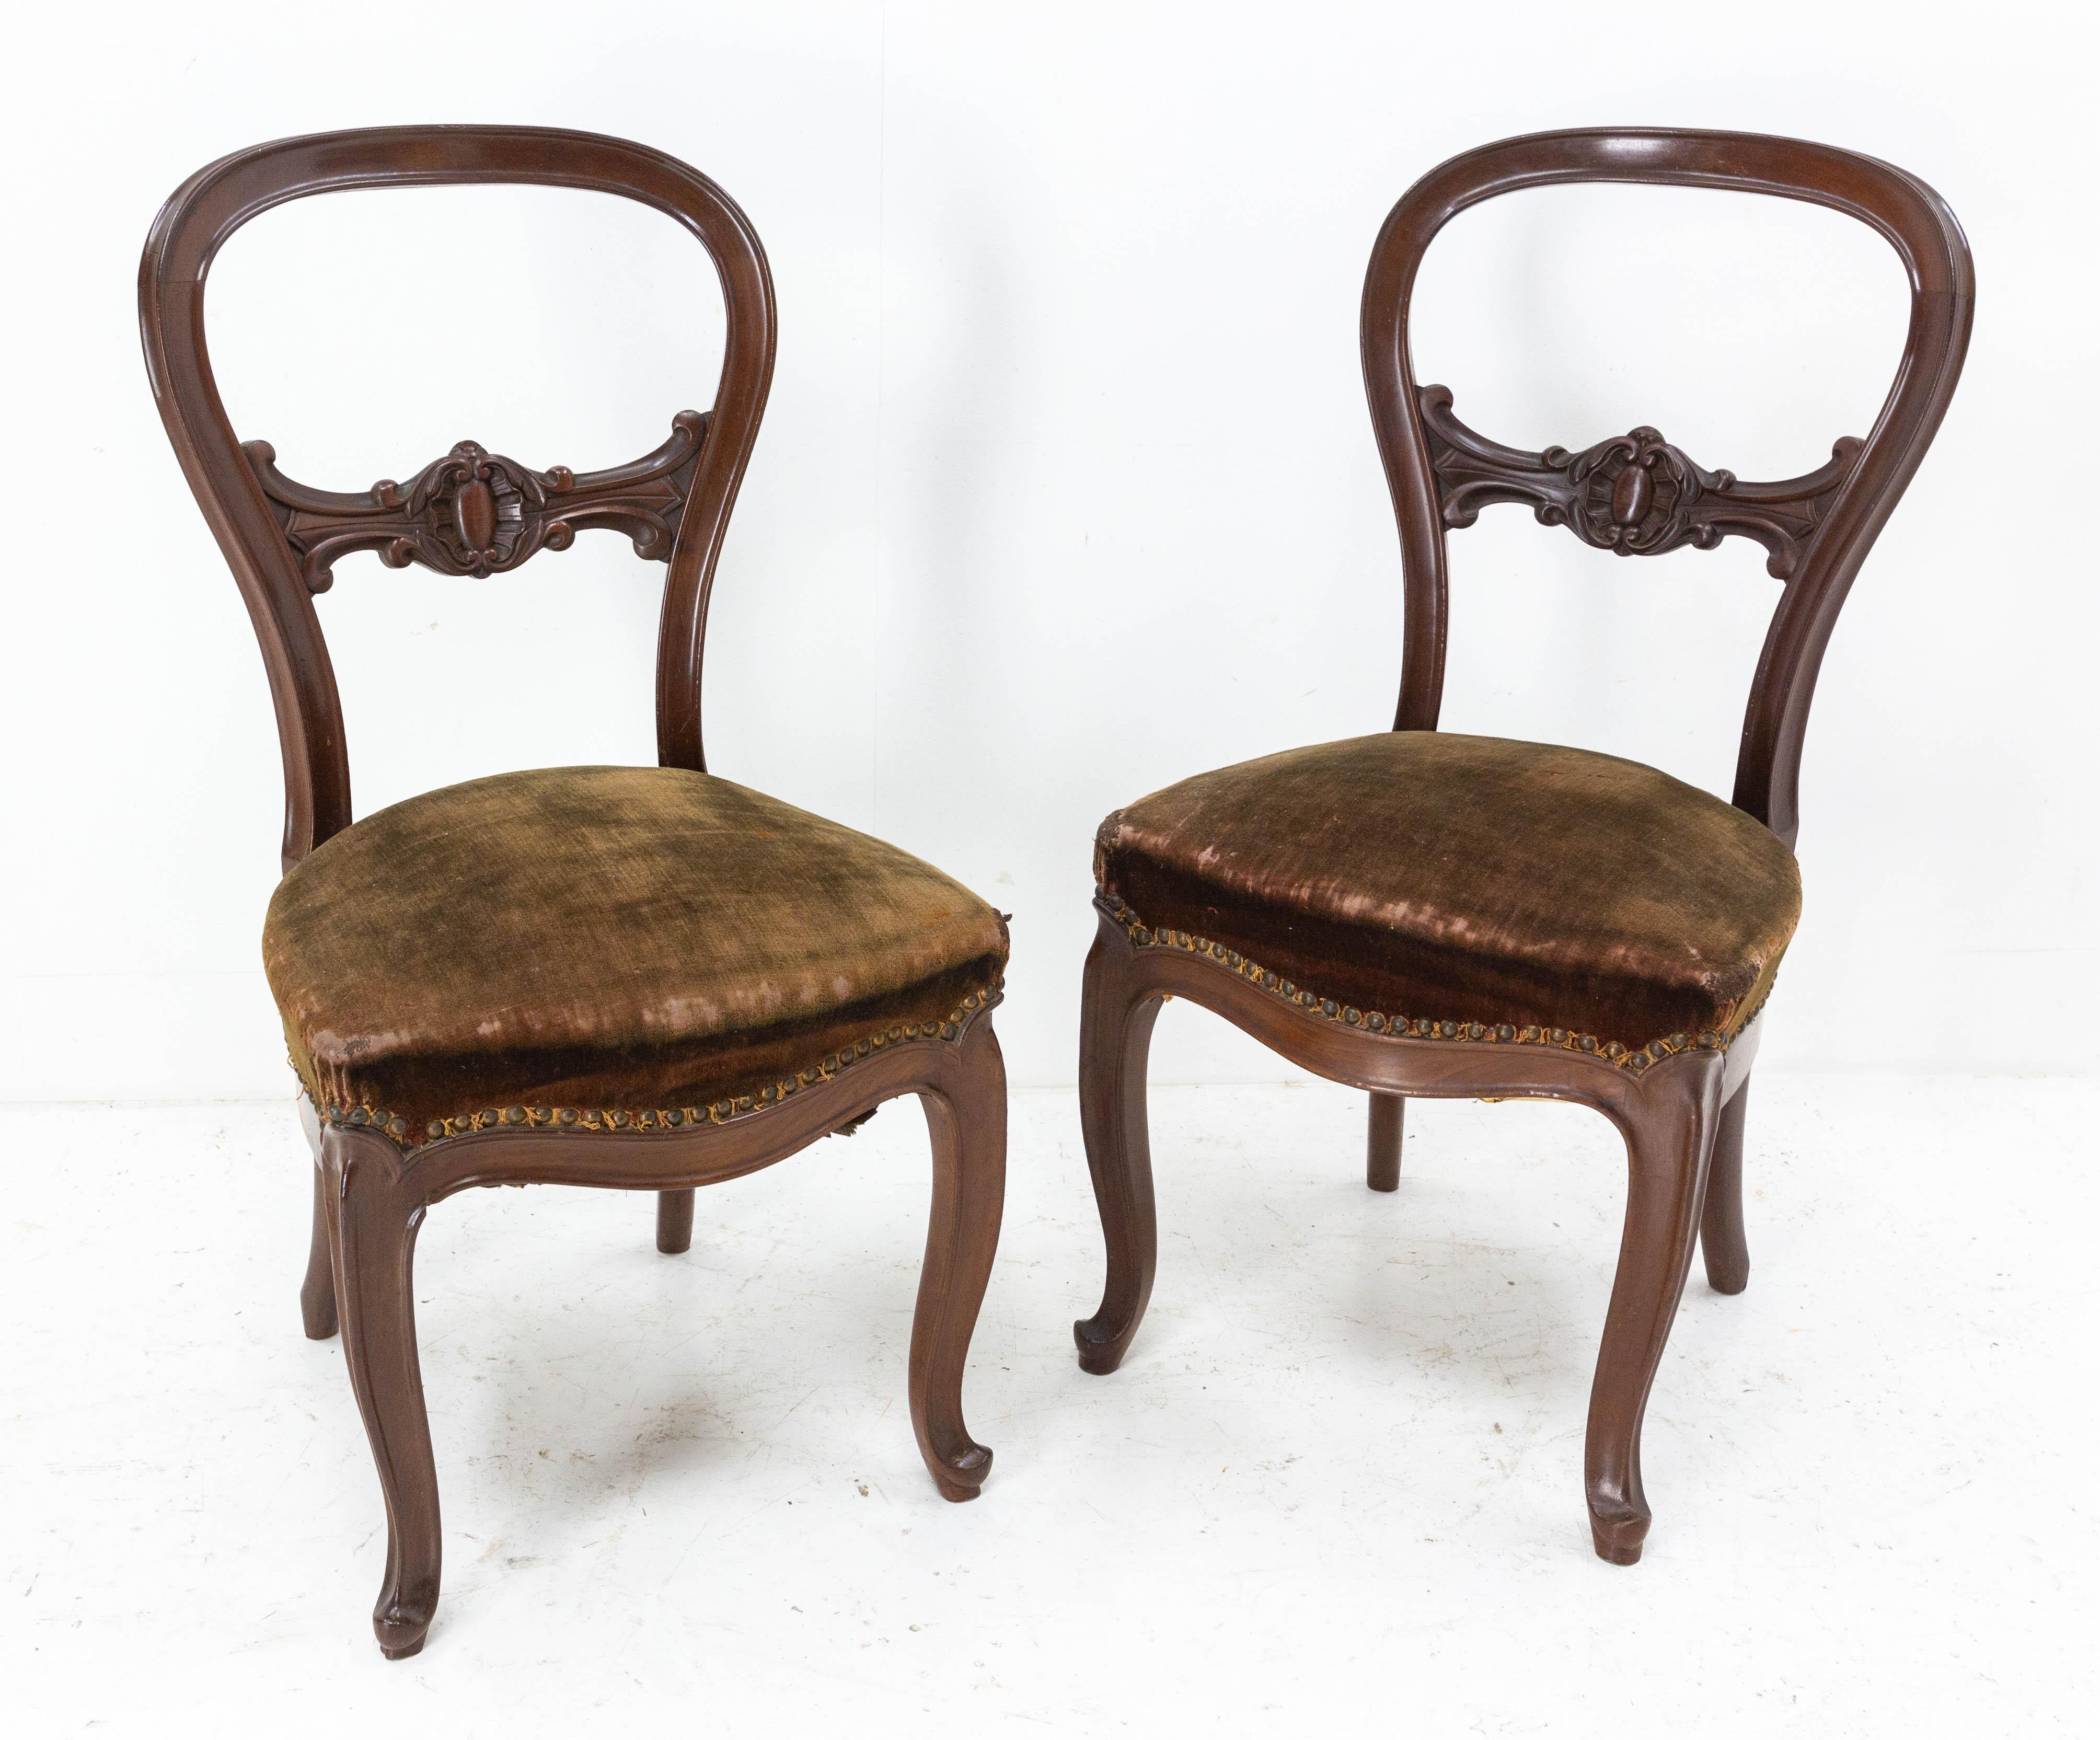 Pair of Napoleon III Exotic Wood and Velvet Chairs French, Late 19th Century For Sale 5